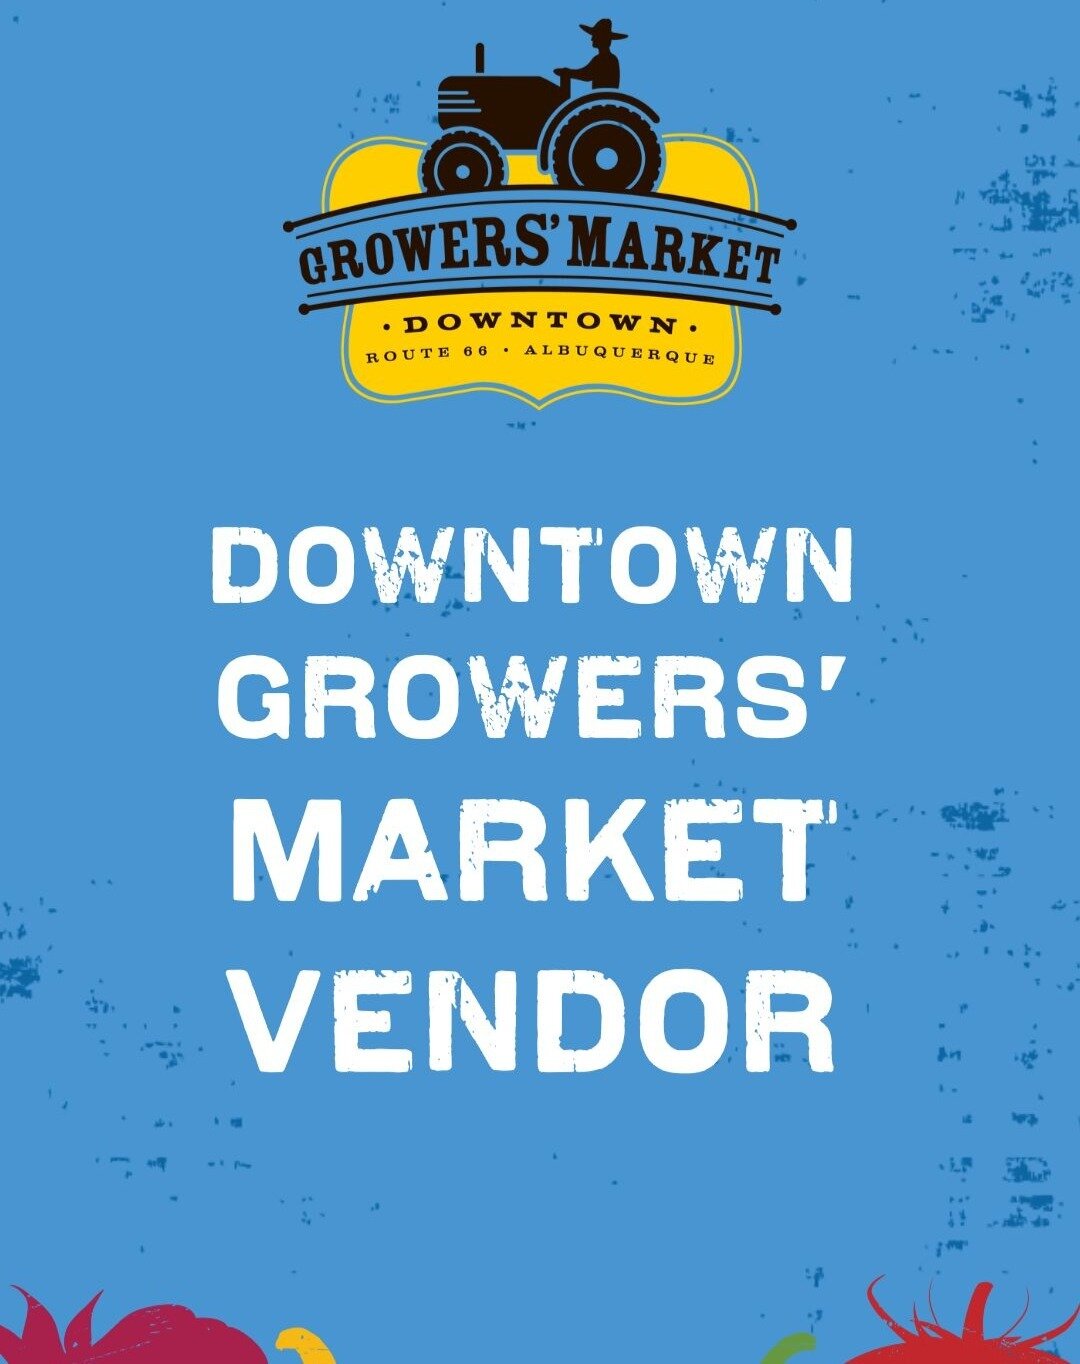 It's almost that time again! We will be back at the Downtown Growers Market on opening day April 13th. We will also have some new products to sell, that are not candle related. Stay tuned!